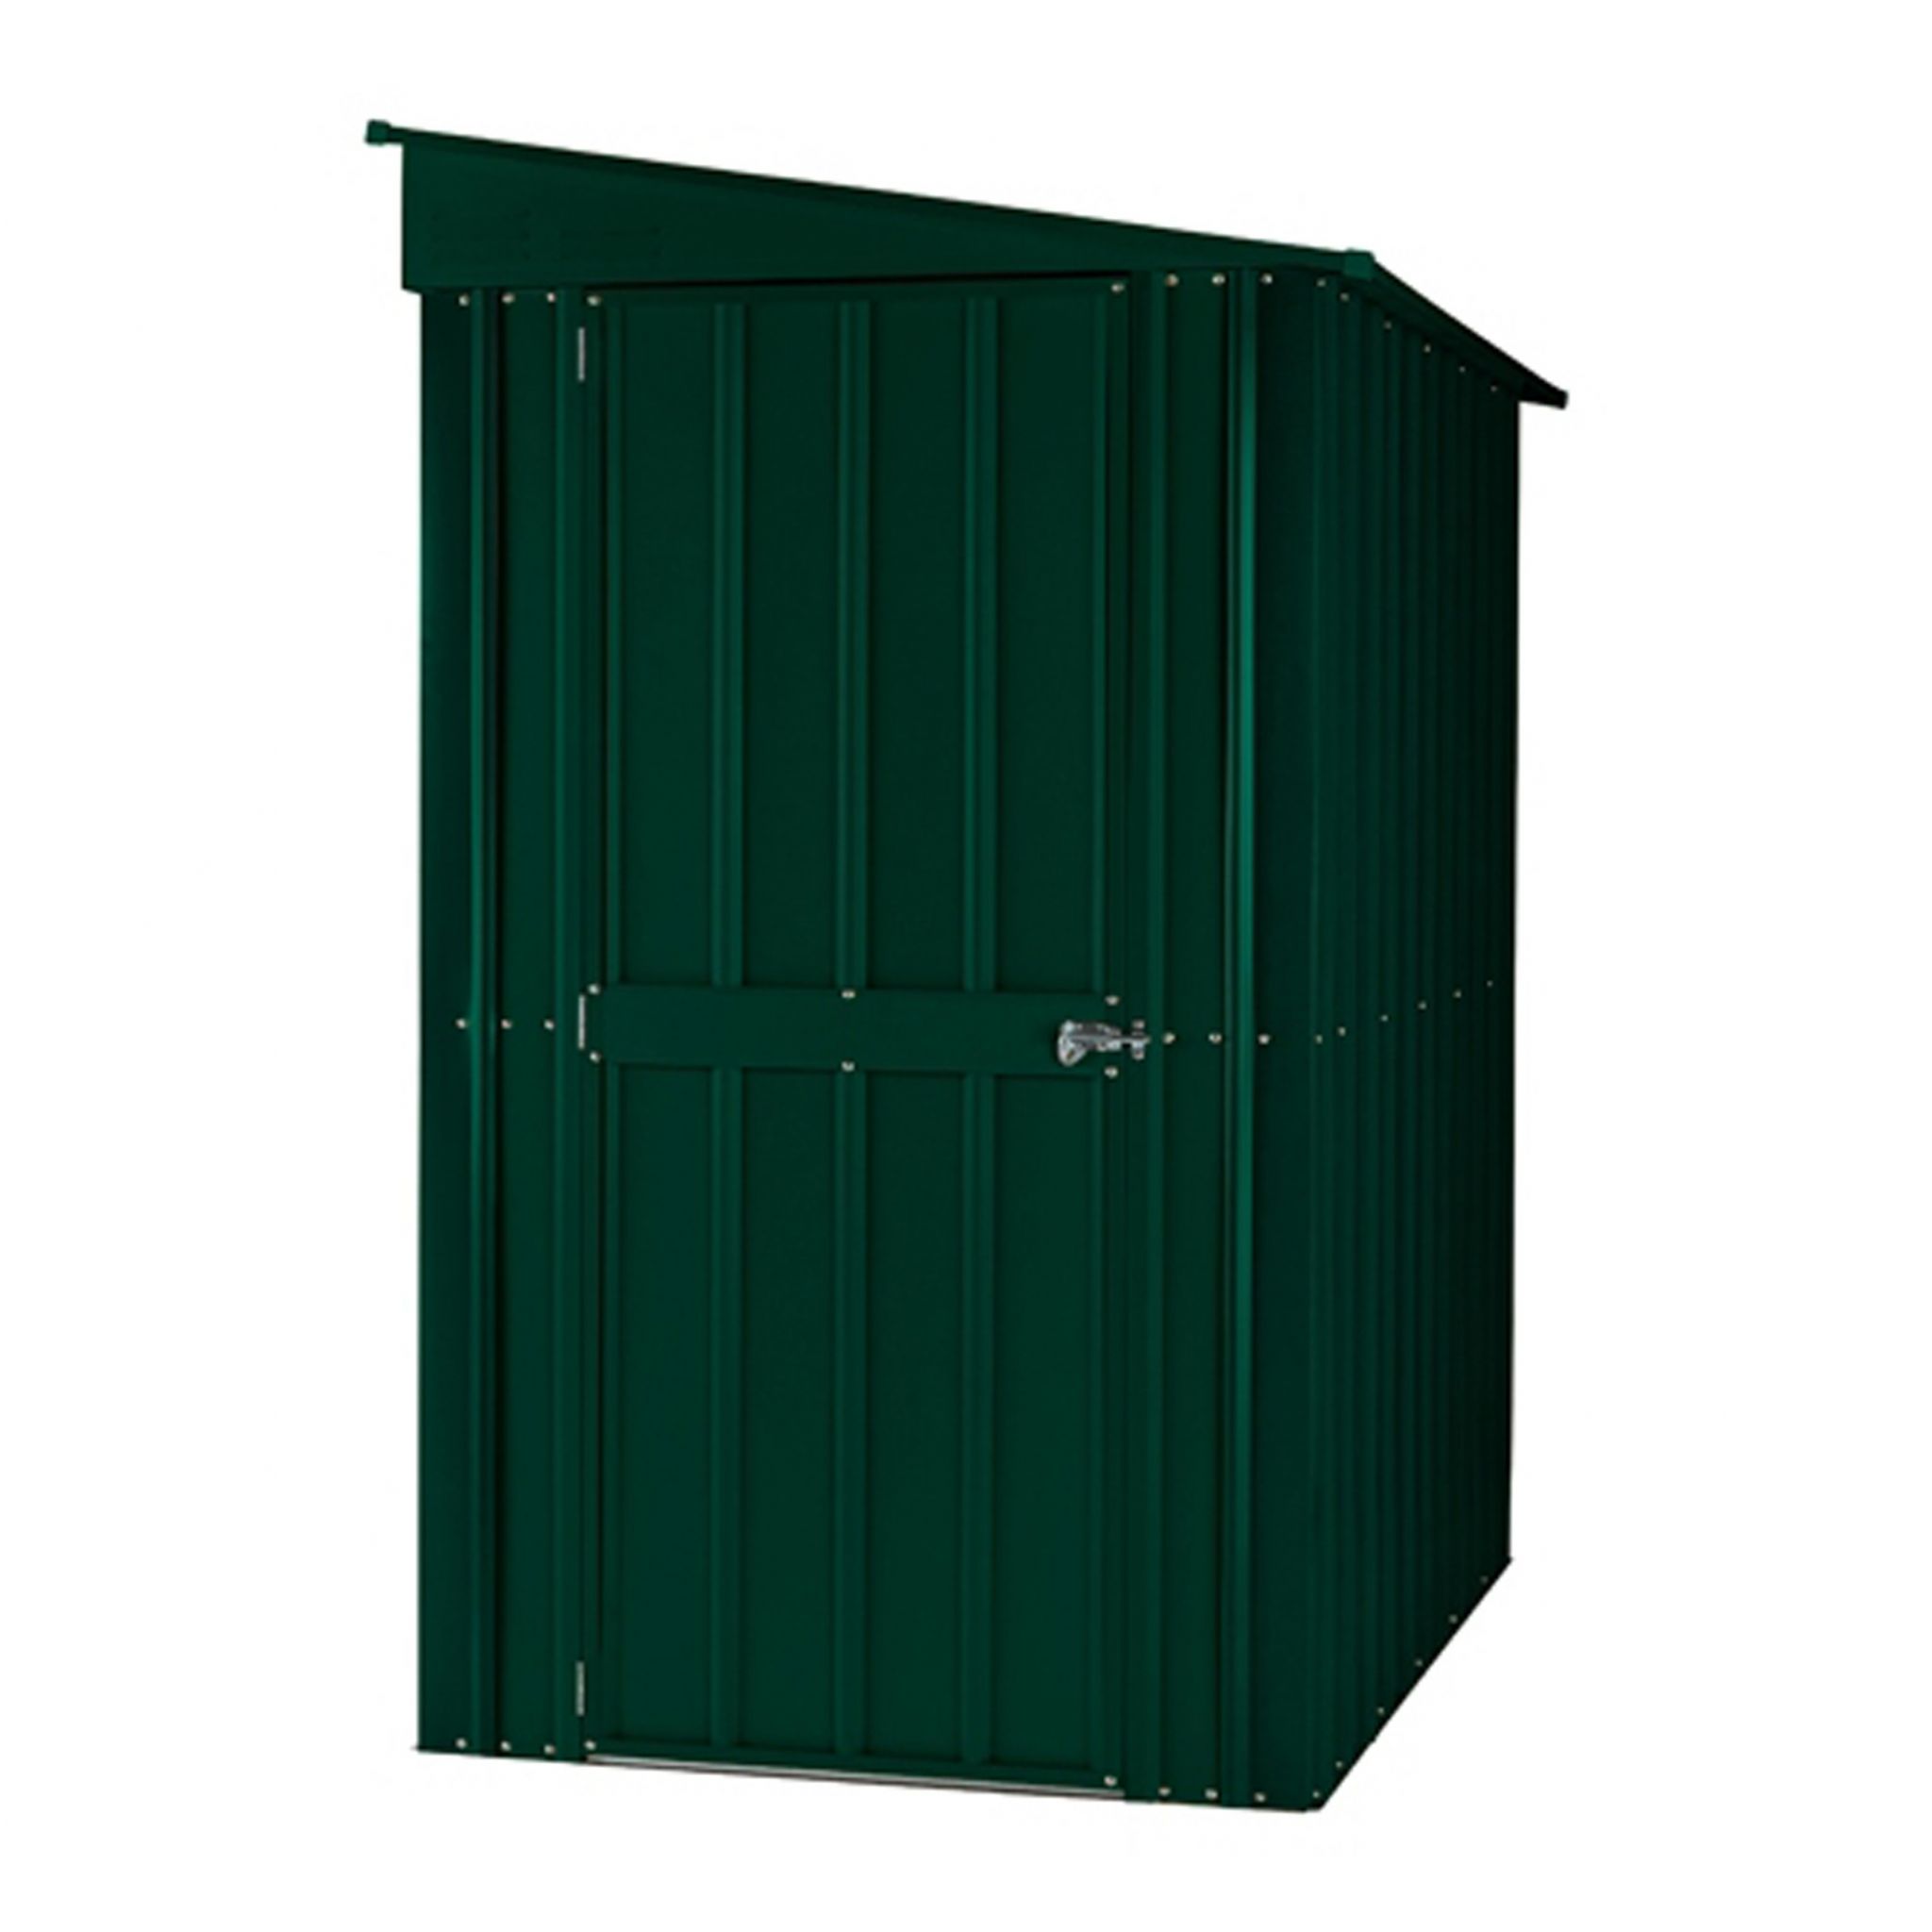 Featured image for “Globel® Lotus™ Lean-To 4x6 Steel Shed”